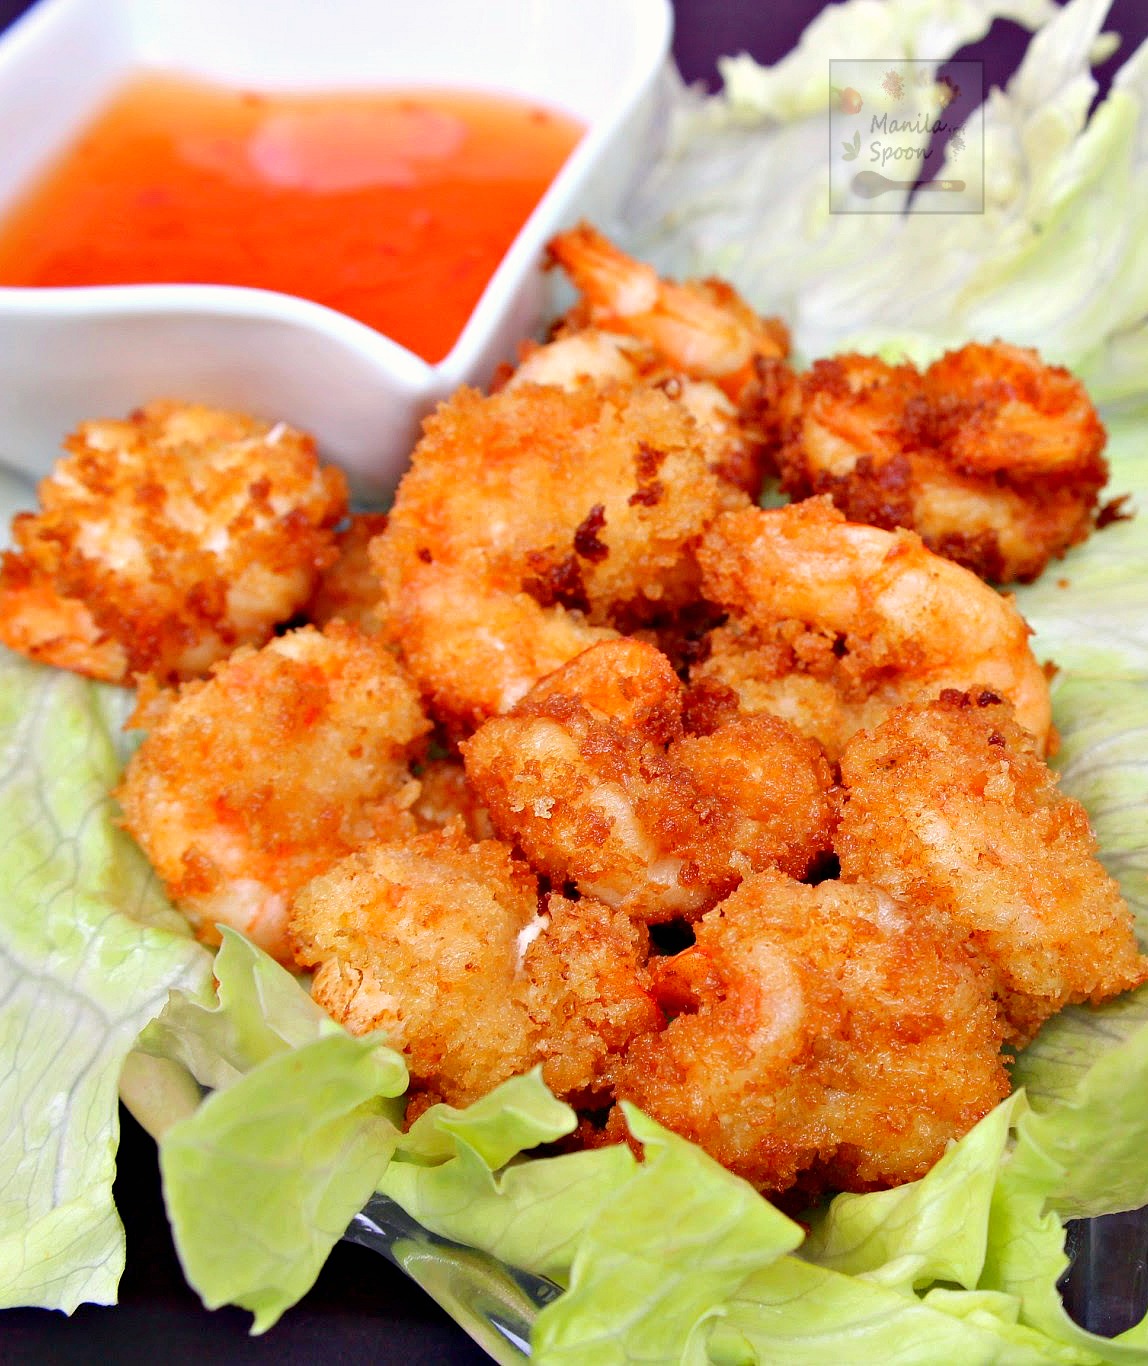 Camaron Rebosado is a citrus-marinated battered shrimp served with a sweet sour sauce and is the Filipino version of tempura. Cruncy-licious and flavorful, it's a great appetizer and a sure crowd-pleaser! | manilaspoon.com